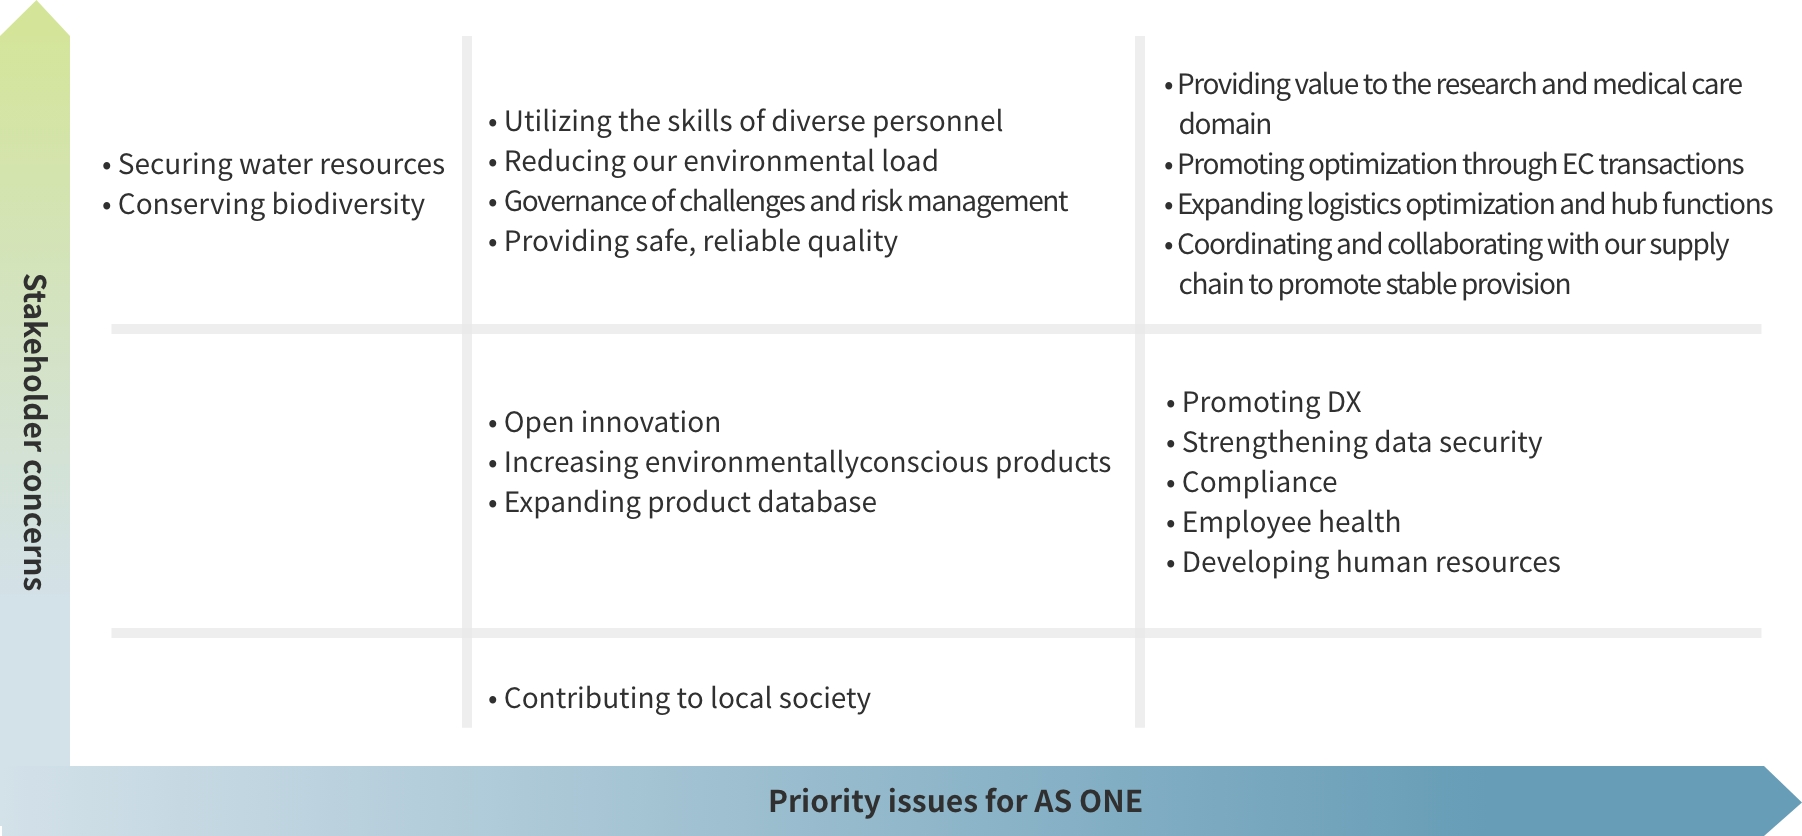 stakeholder concerns and priority issues for AS ONE